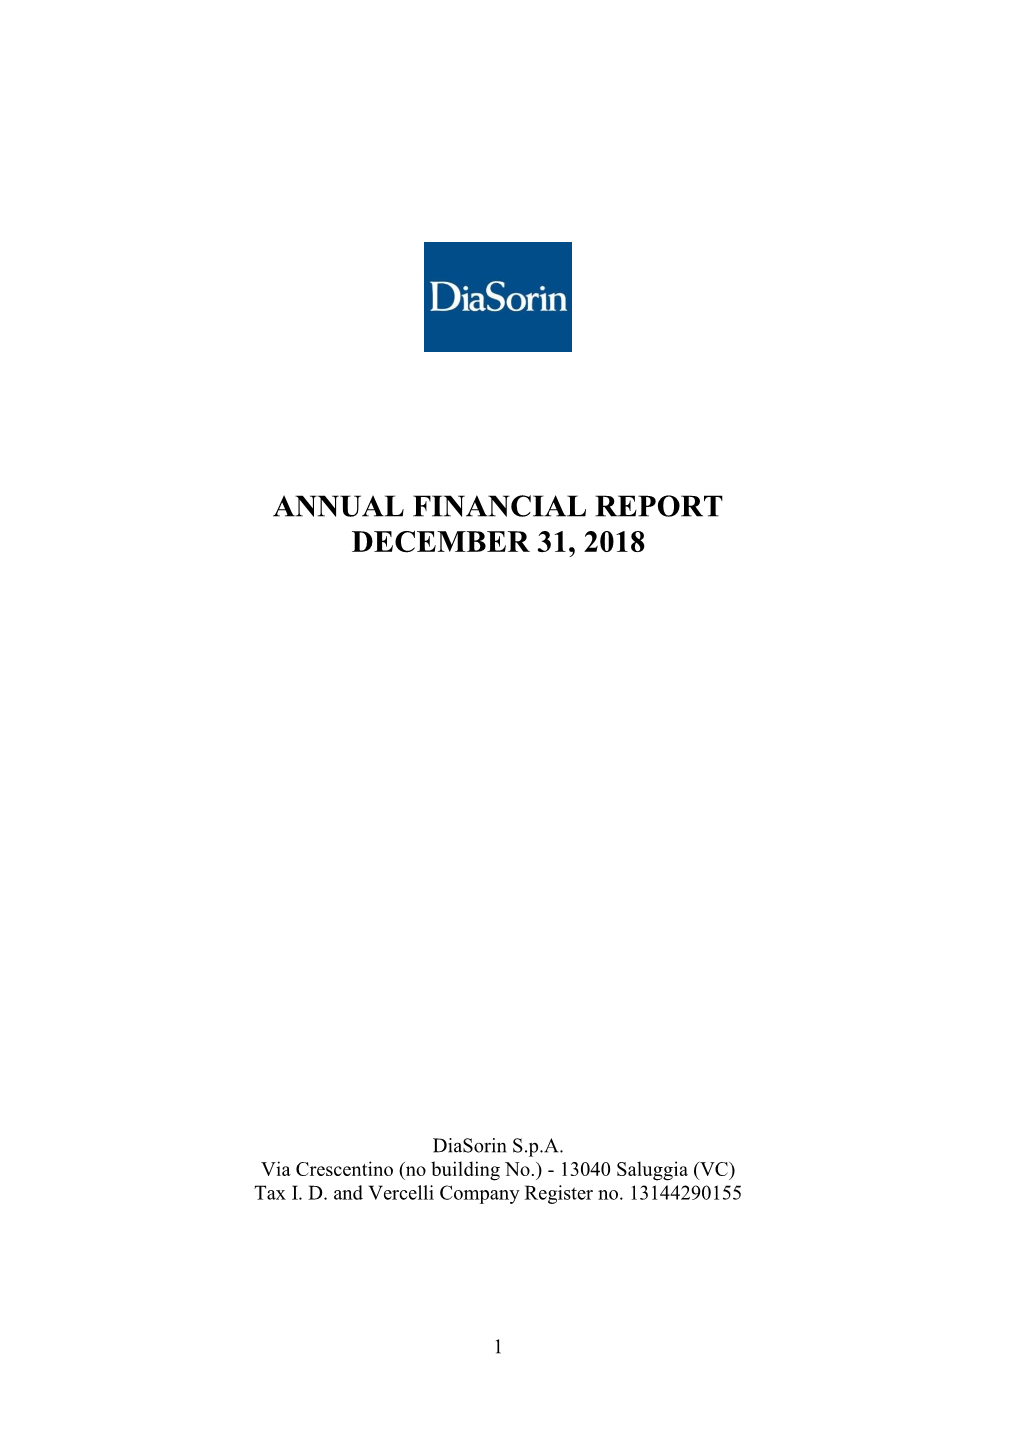 Annual Financial Report December 31, 2018